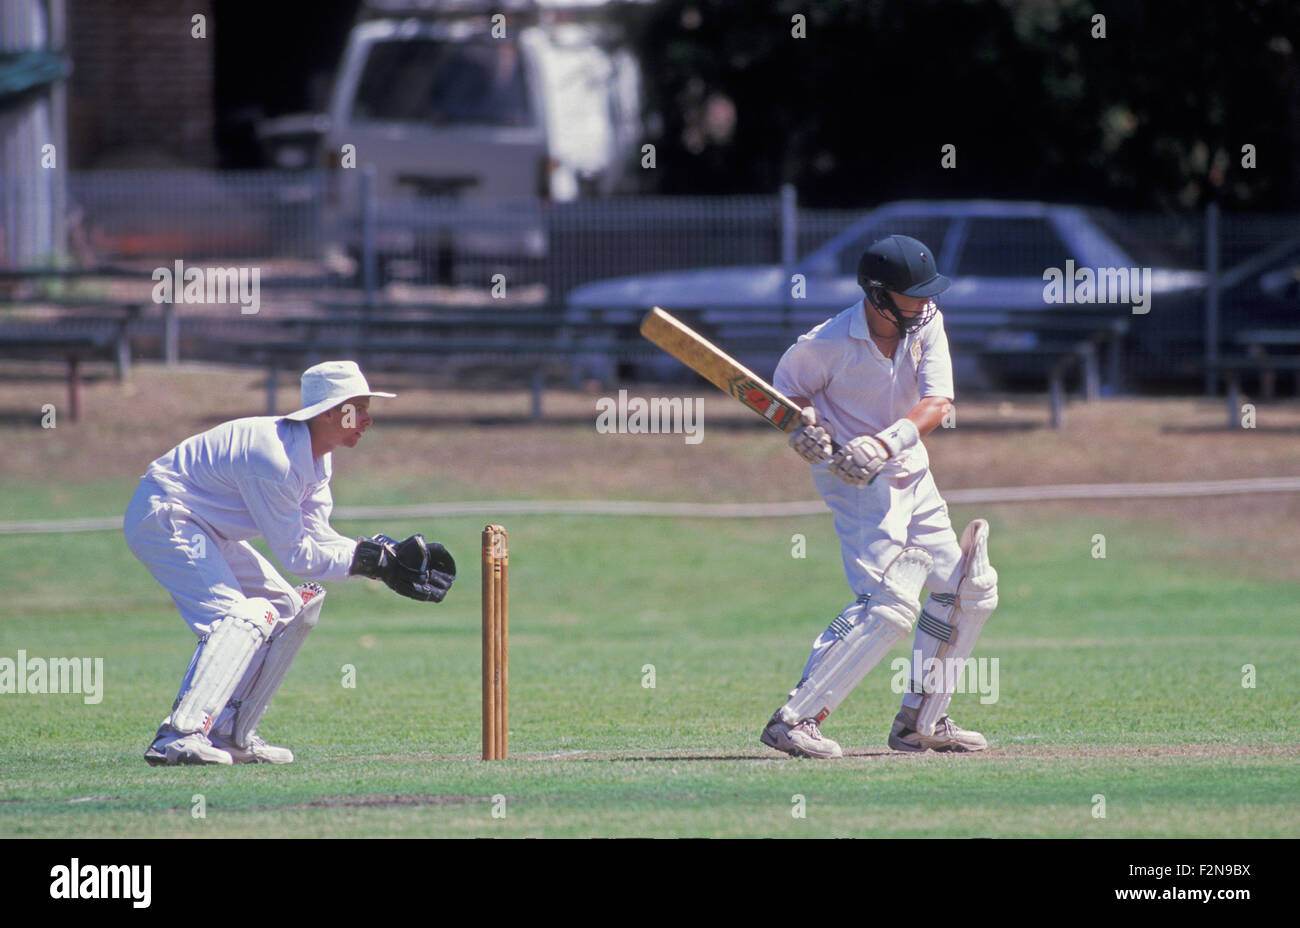 Game of cricket in progress, New South Wales, Australia Stock Photo